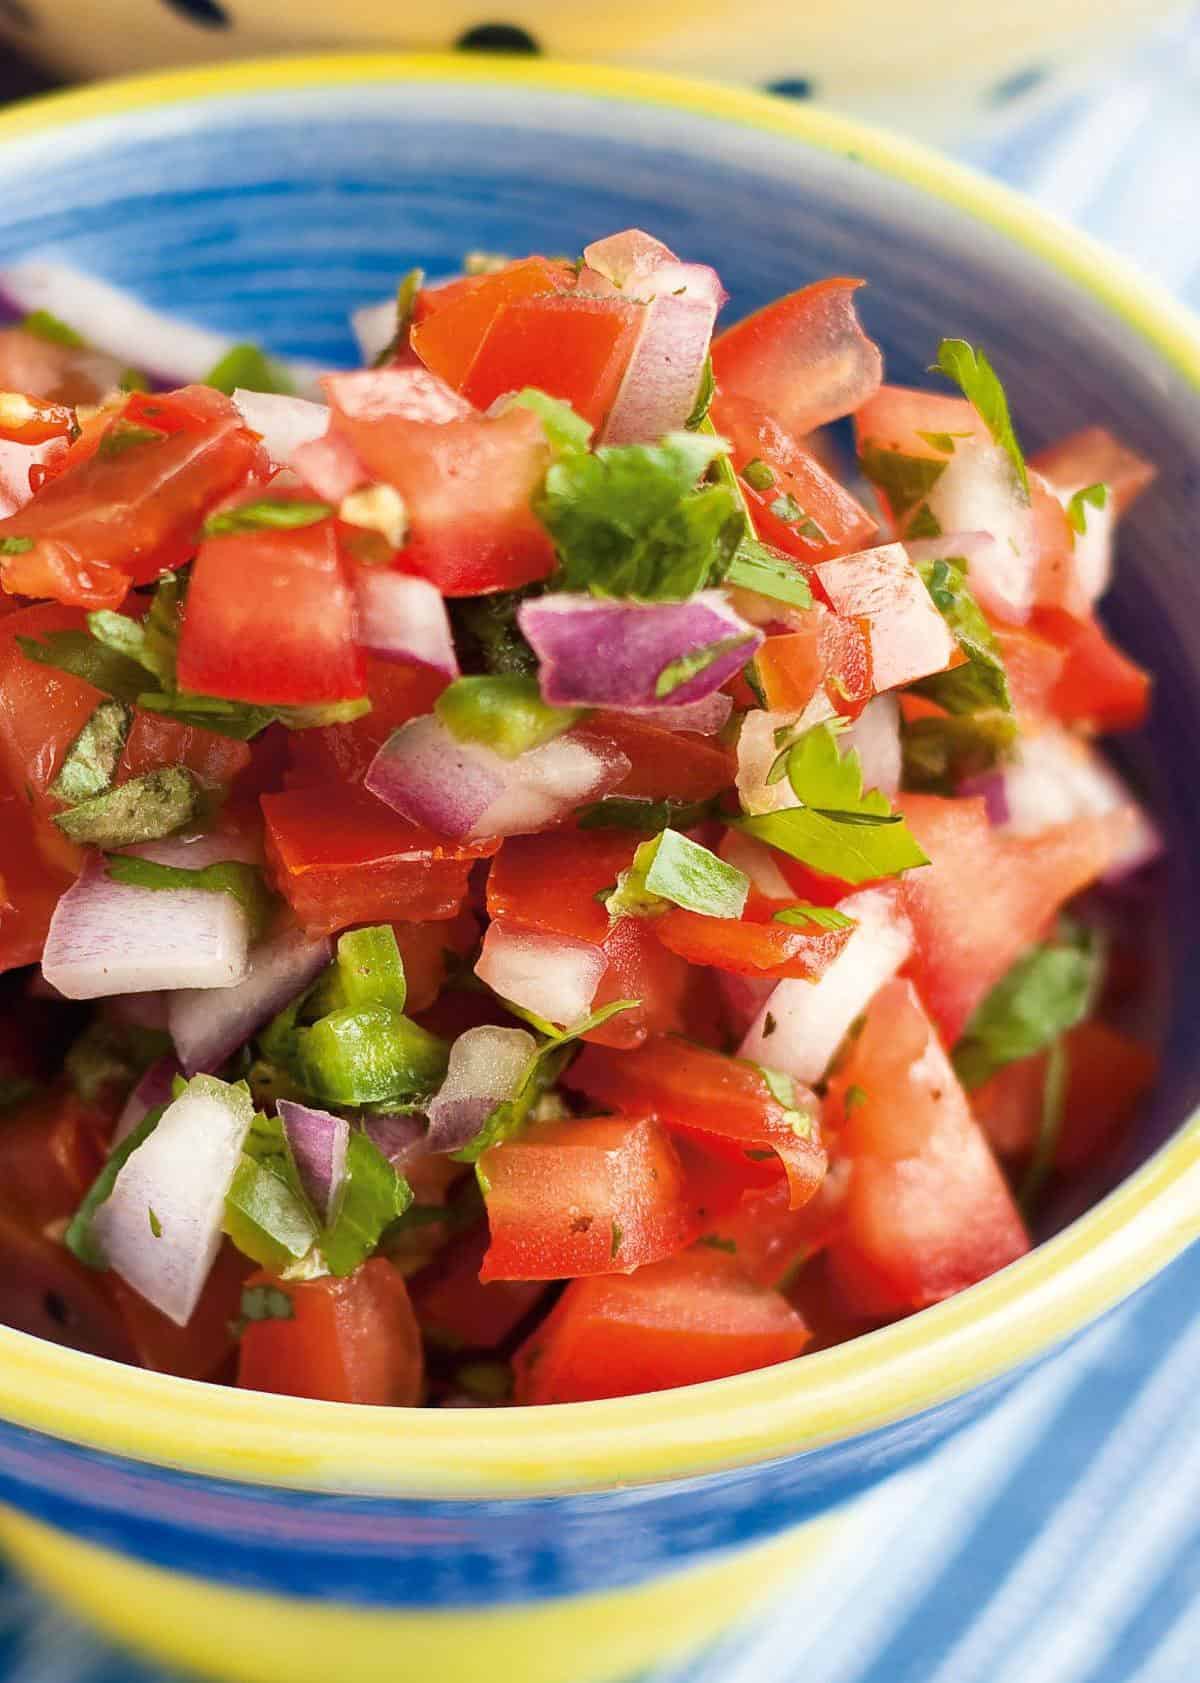  It's time to get your dip on with this sensational tomato salsa!